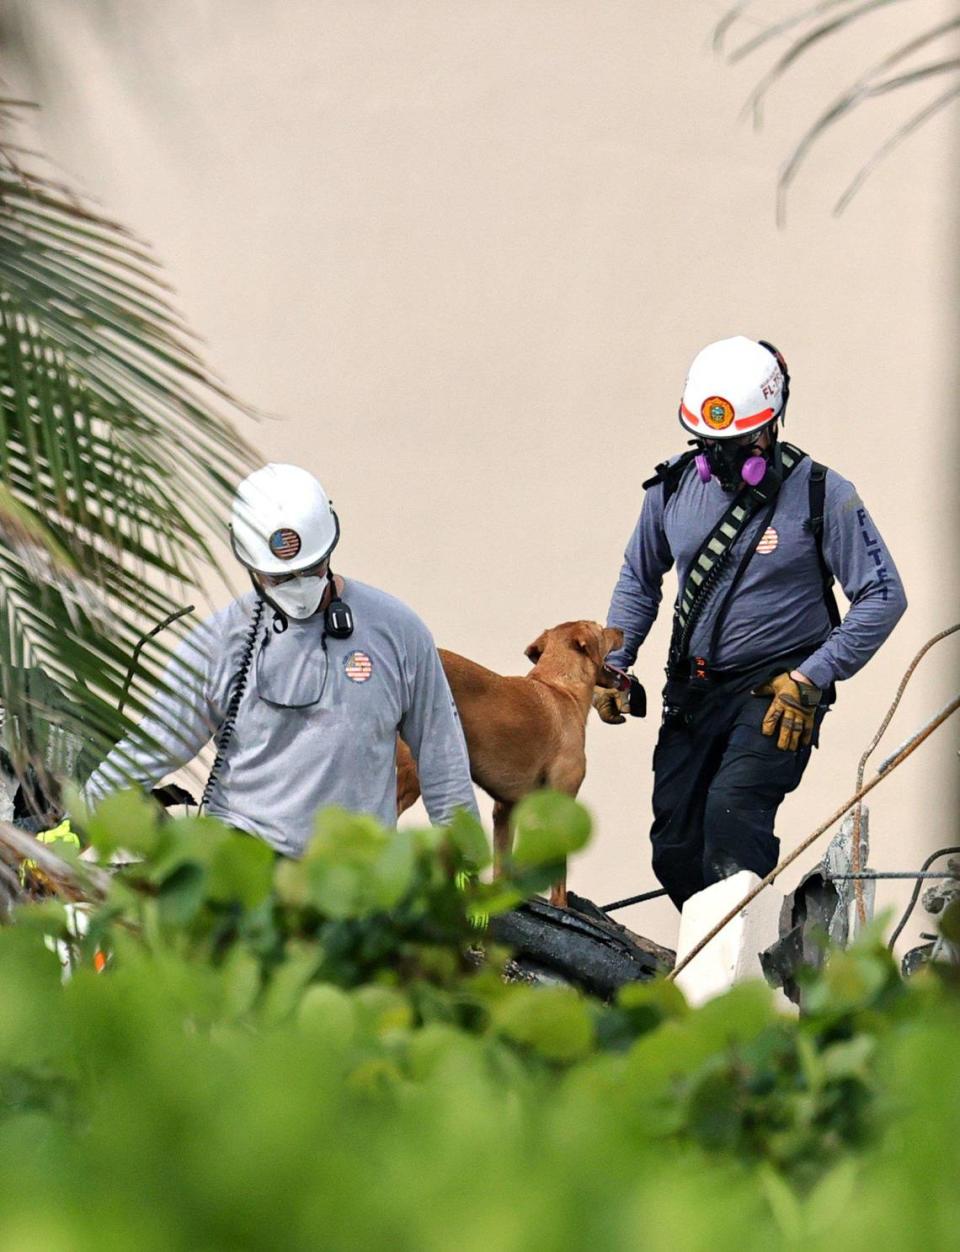 Search and rescue personnel with dogs search for survivors through the rubble at the Champlain Towers South Condo in Surfside, Florida, Friday, June 25, 2021. The apartment building partially collapsed on Thursday, June 24.